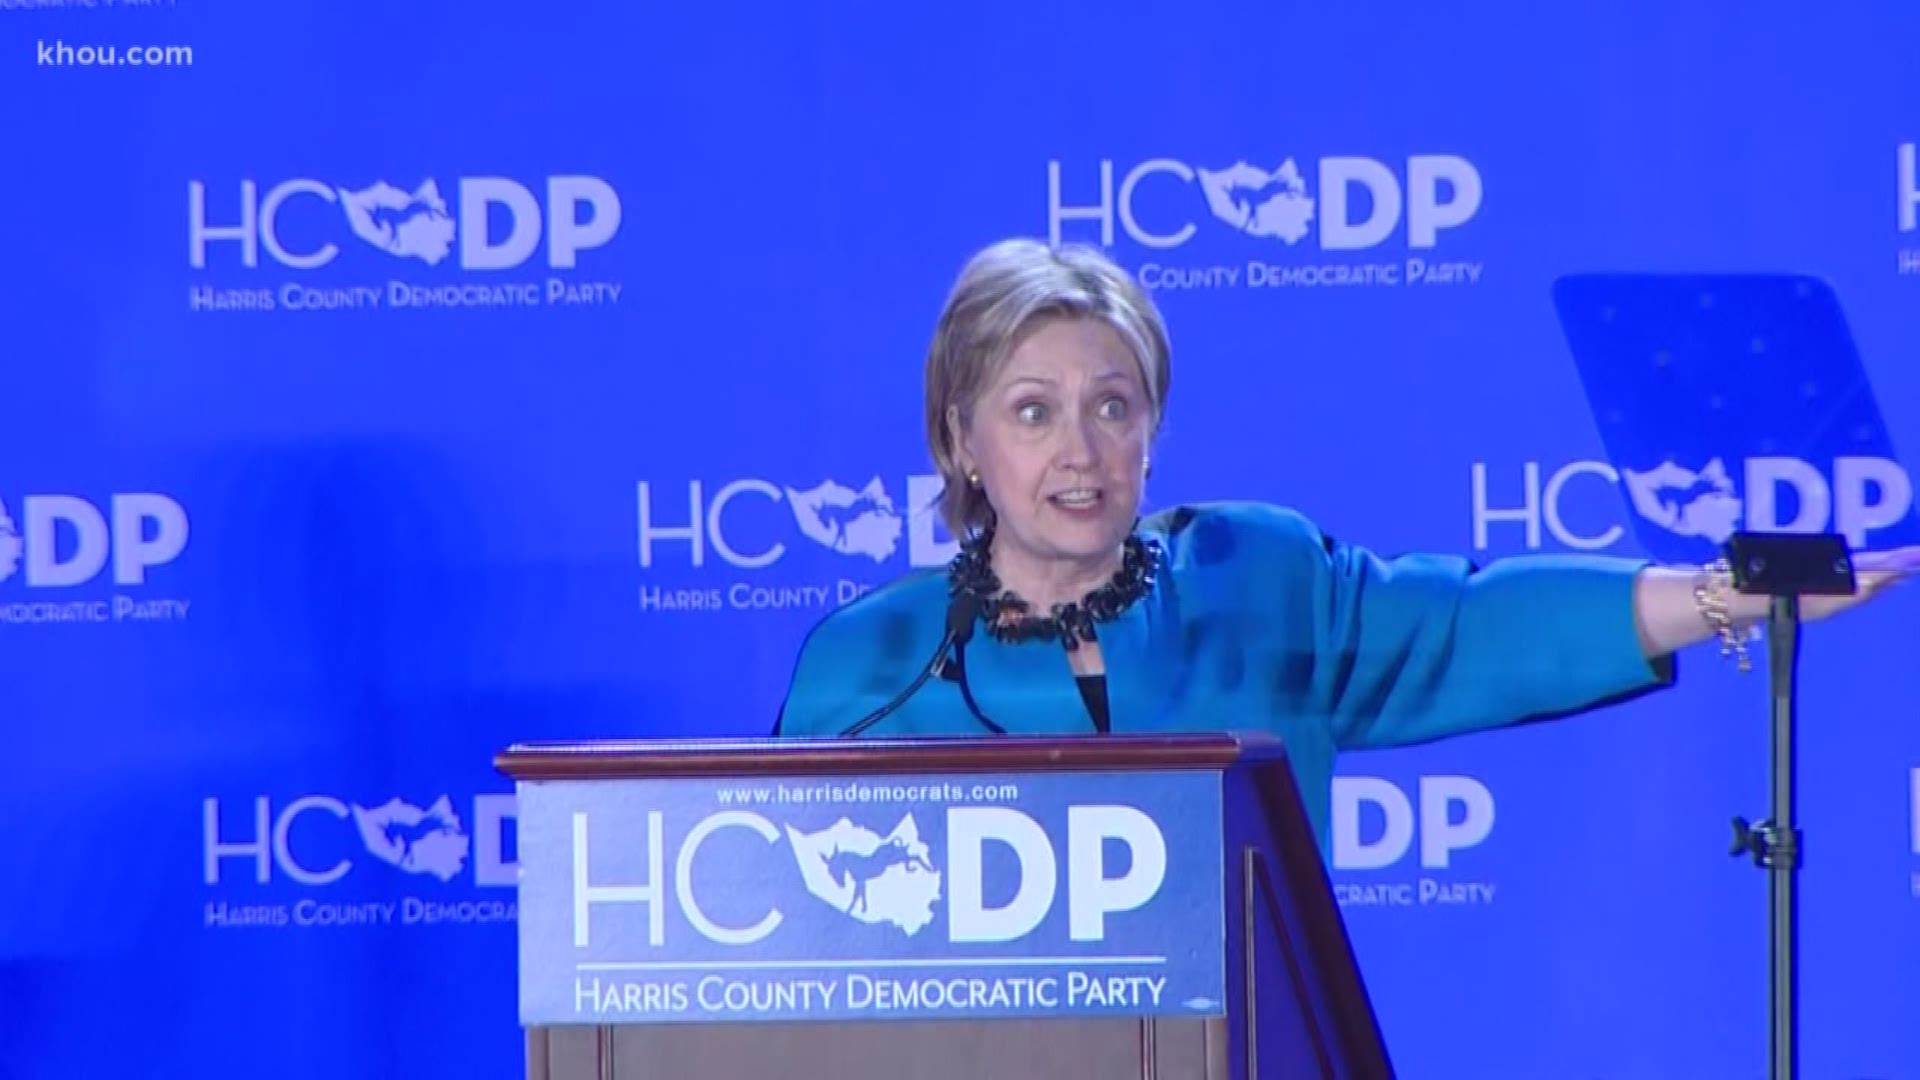 Former Secretary of State Hillary Clinton said she sees a path to record turnout in 2020 that she believes could turn the Texas House blue. The former first lady and presidential candidate also took a few jabs at President Trump during a speech in Houston.